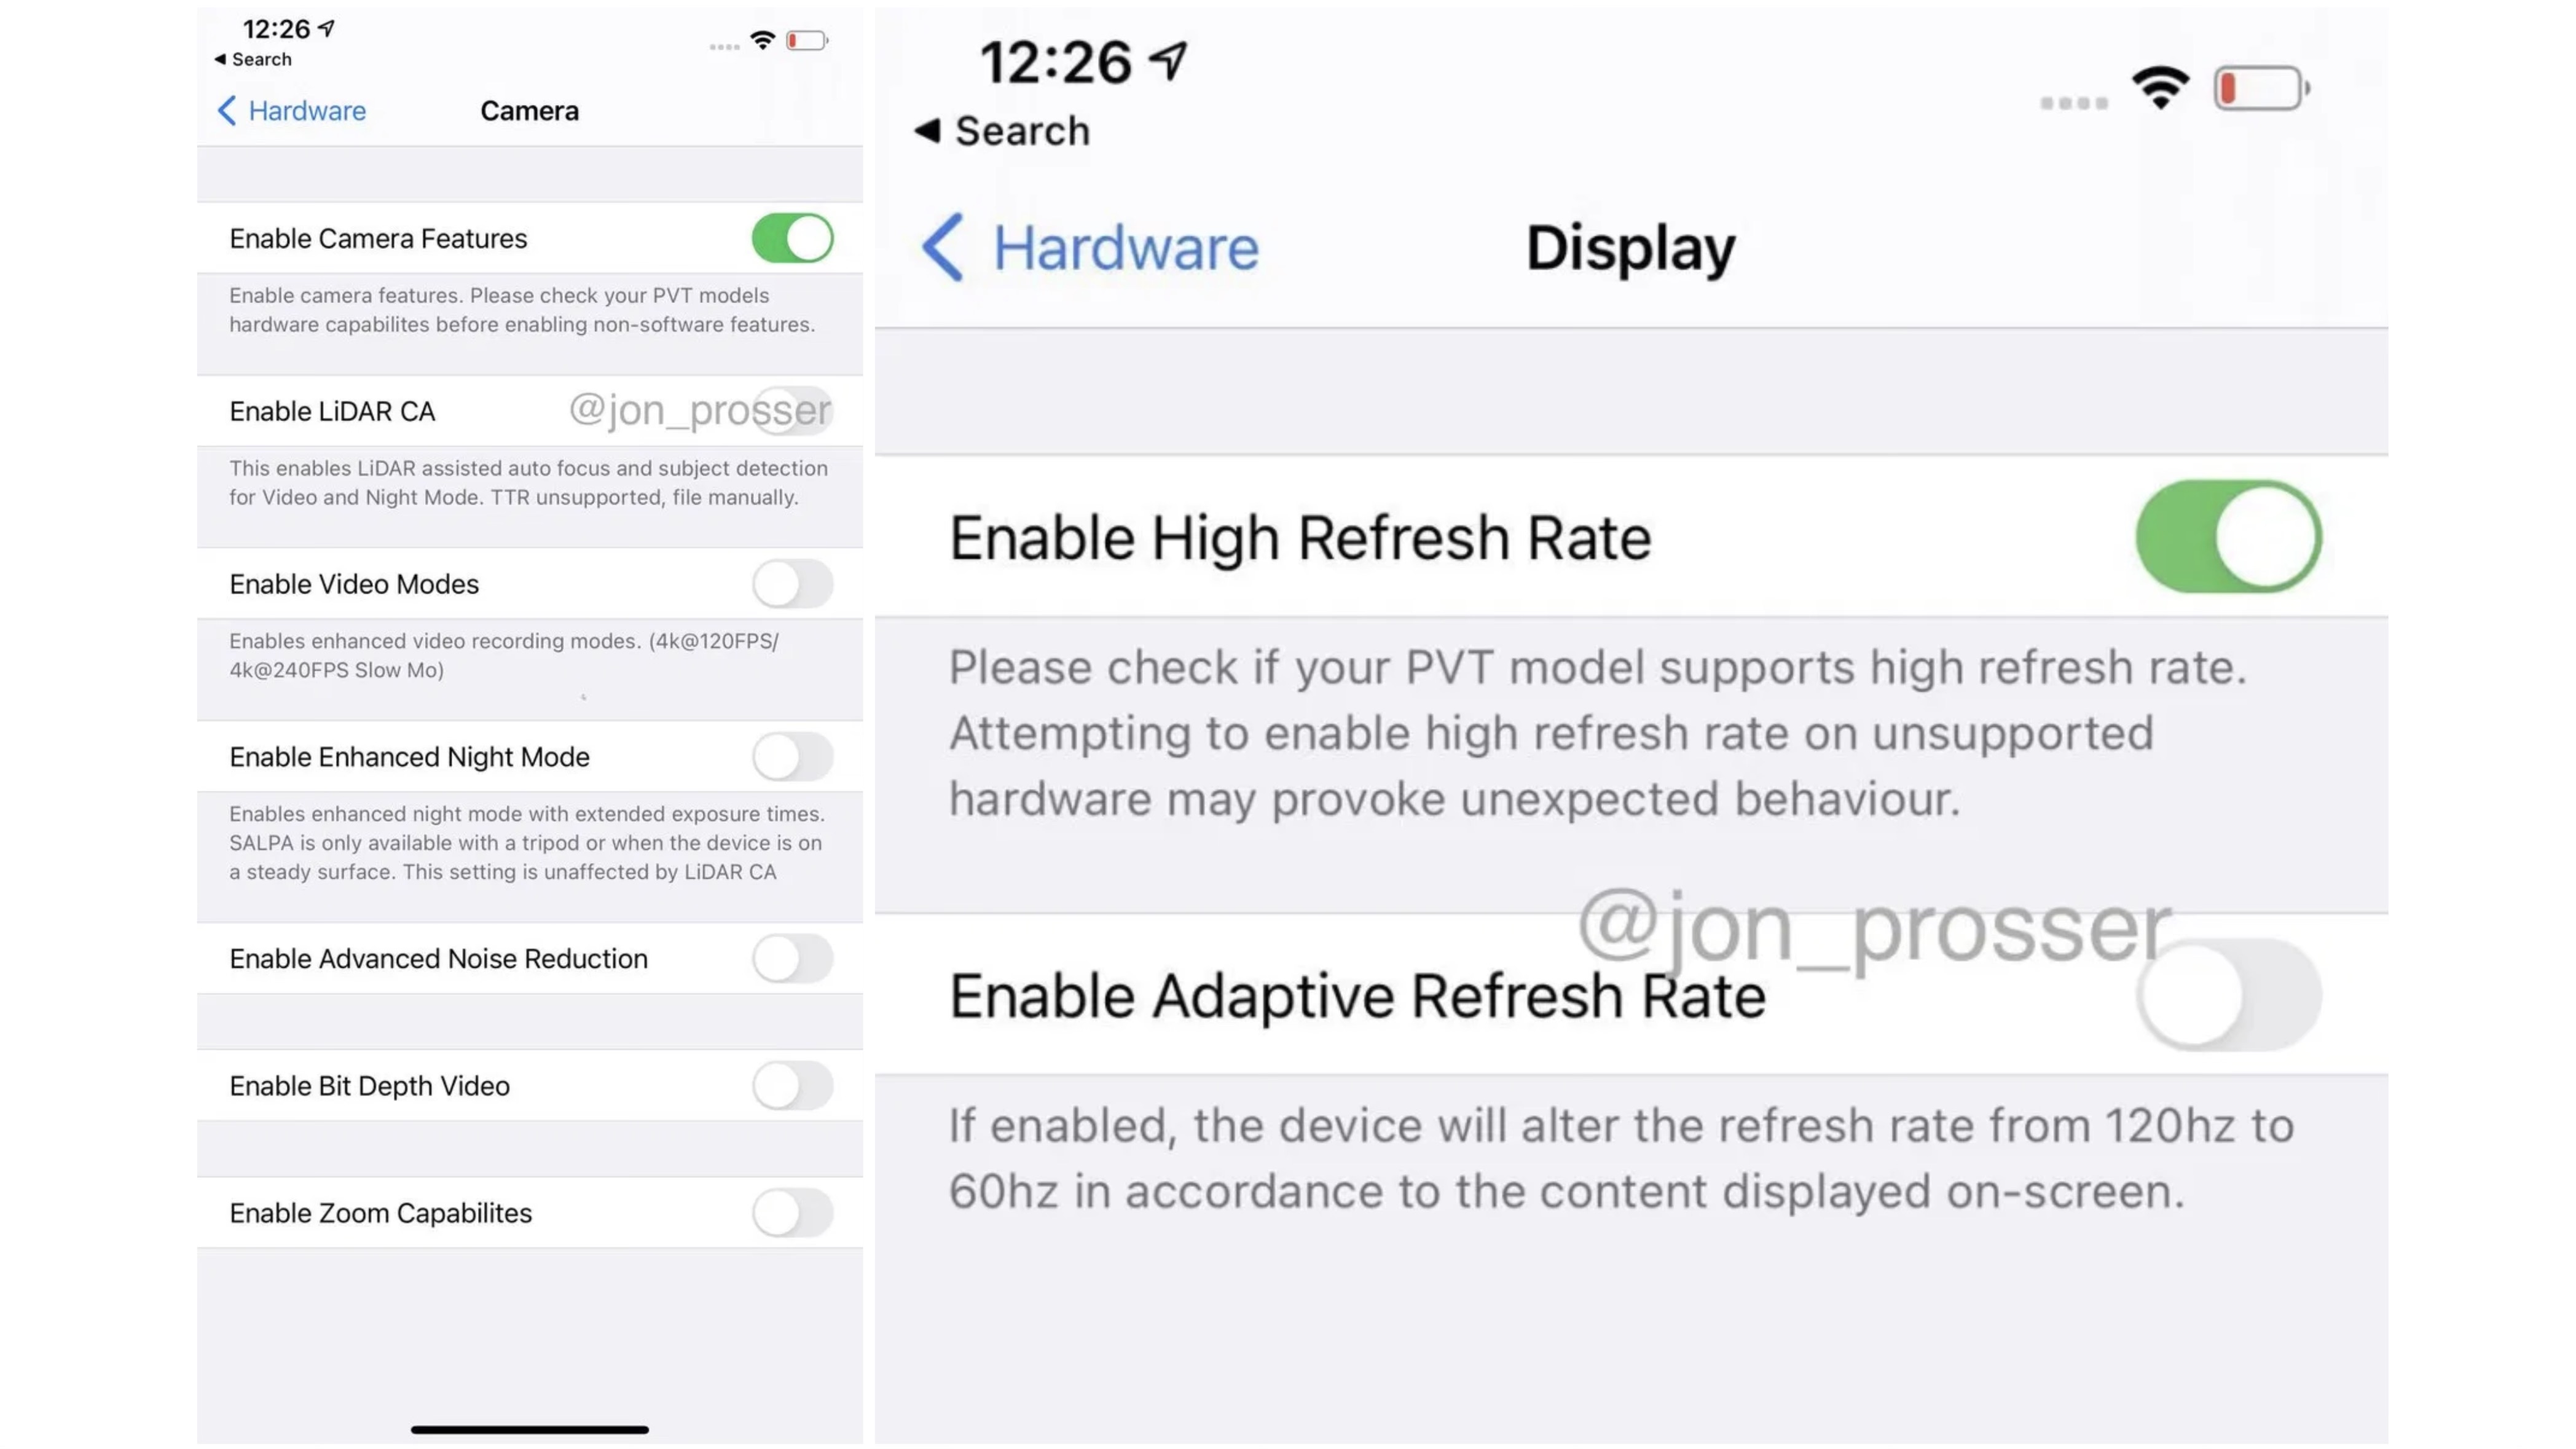 Rumors: Images claim to show iPhone 12 Pro Max camera features, 120hz display settings, notch size thumbnail